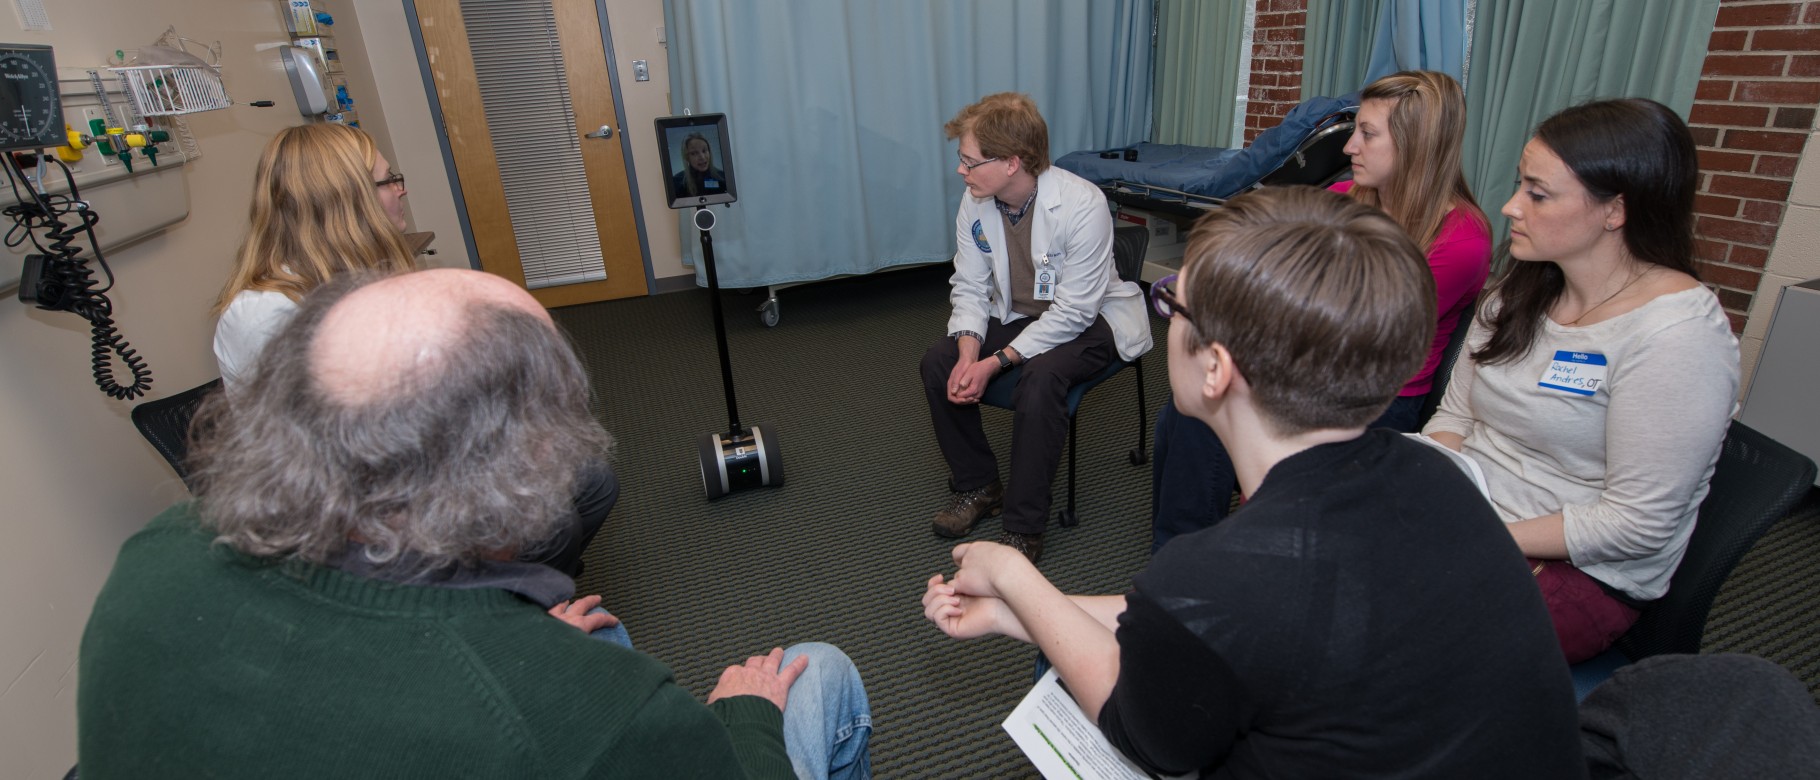 Students engage with Double Robot 